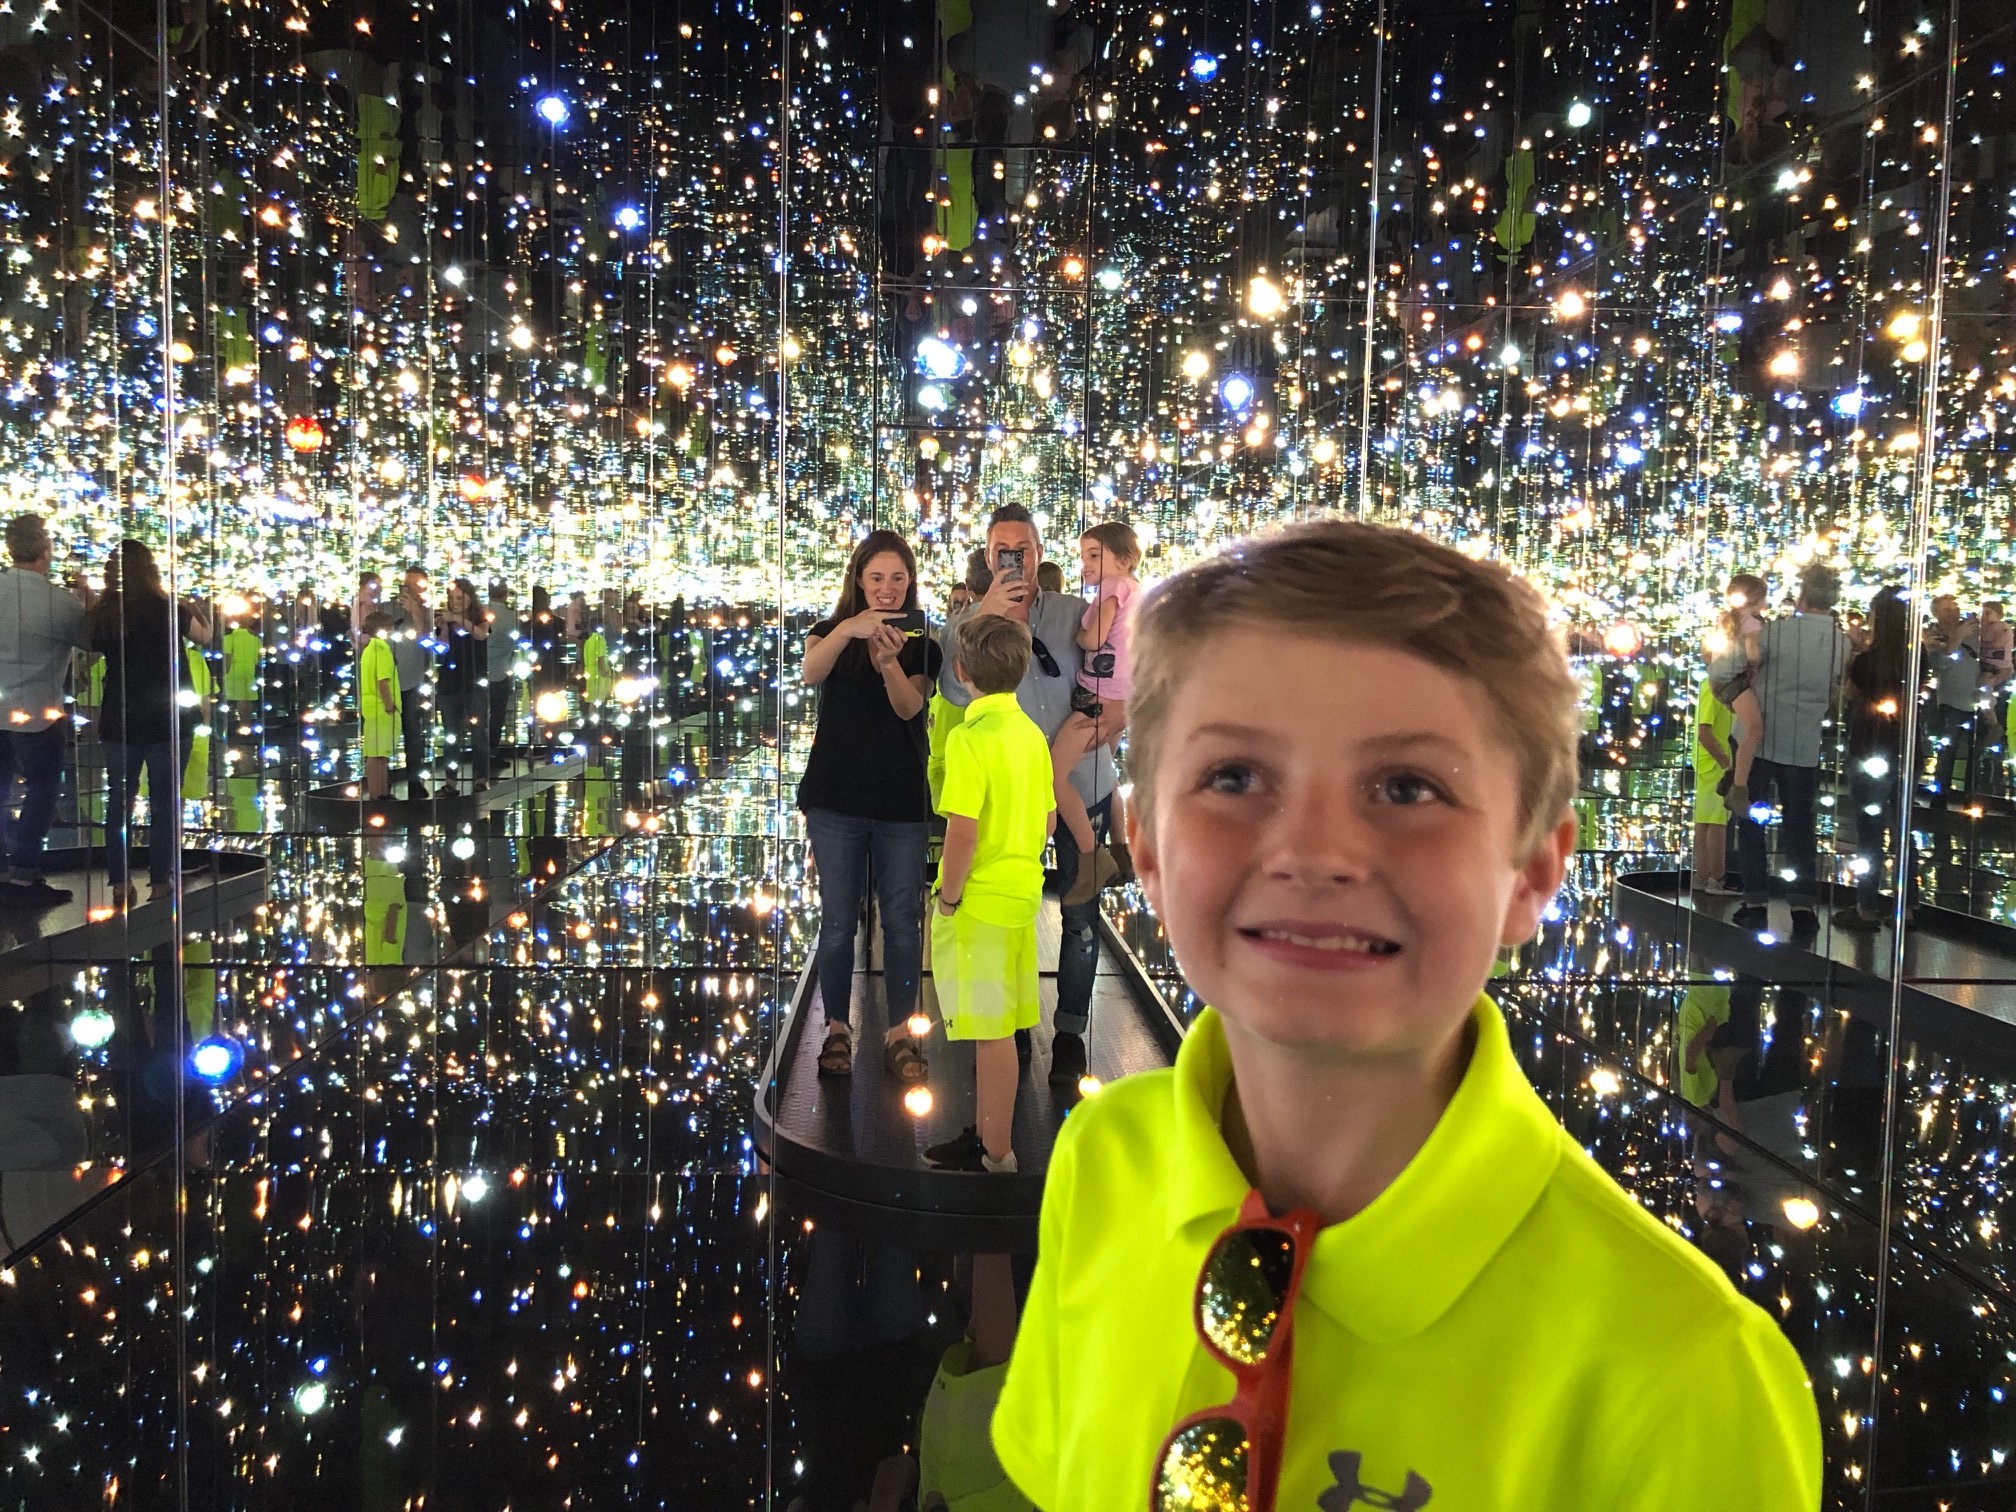 PHS FLOWER SHOW - Behind the Garden, Inspiration from Yayoi Kusama infinity mirrors at Cleveland Museum of art.